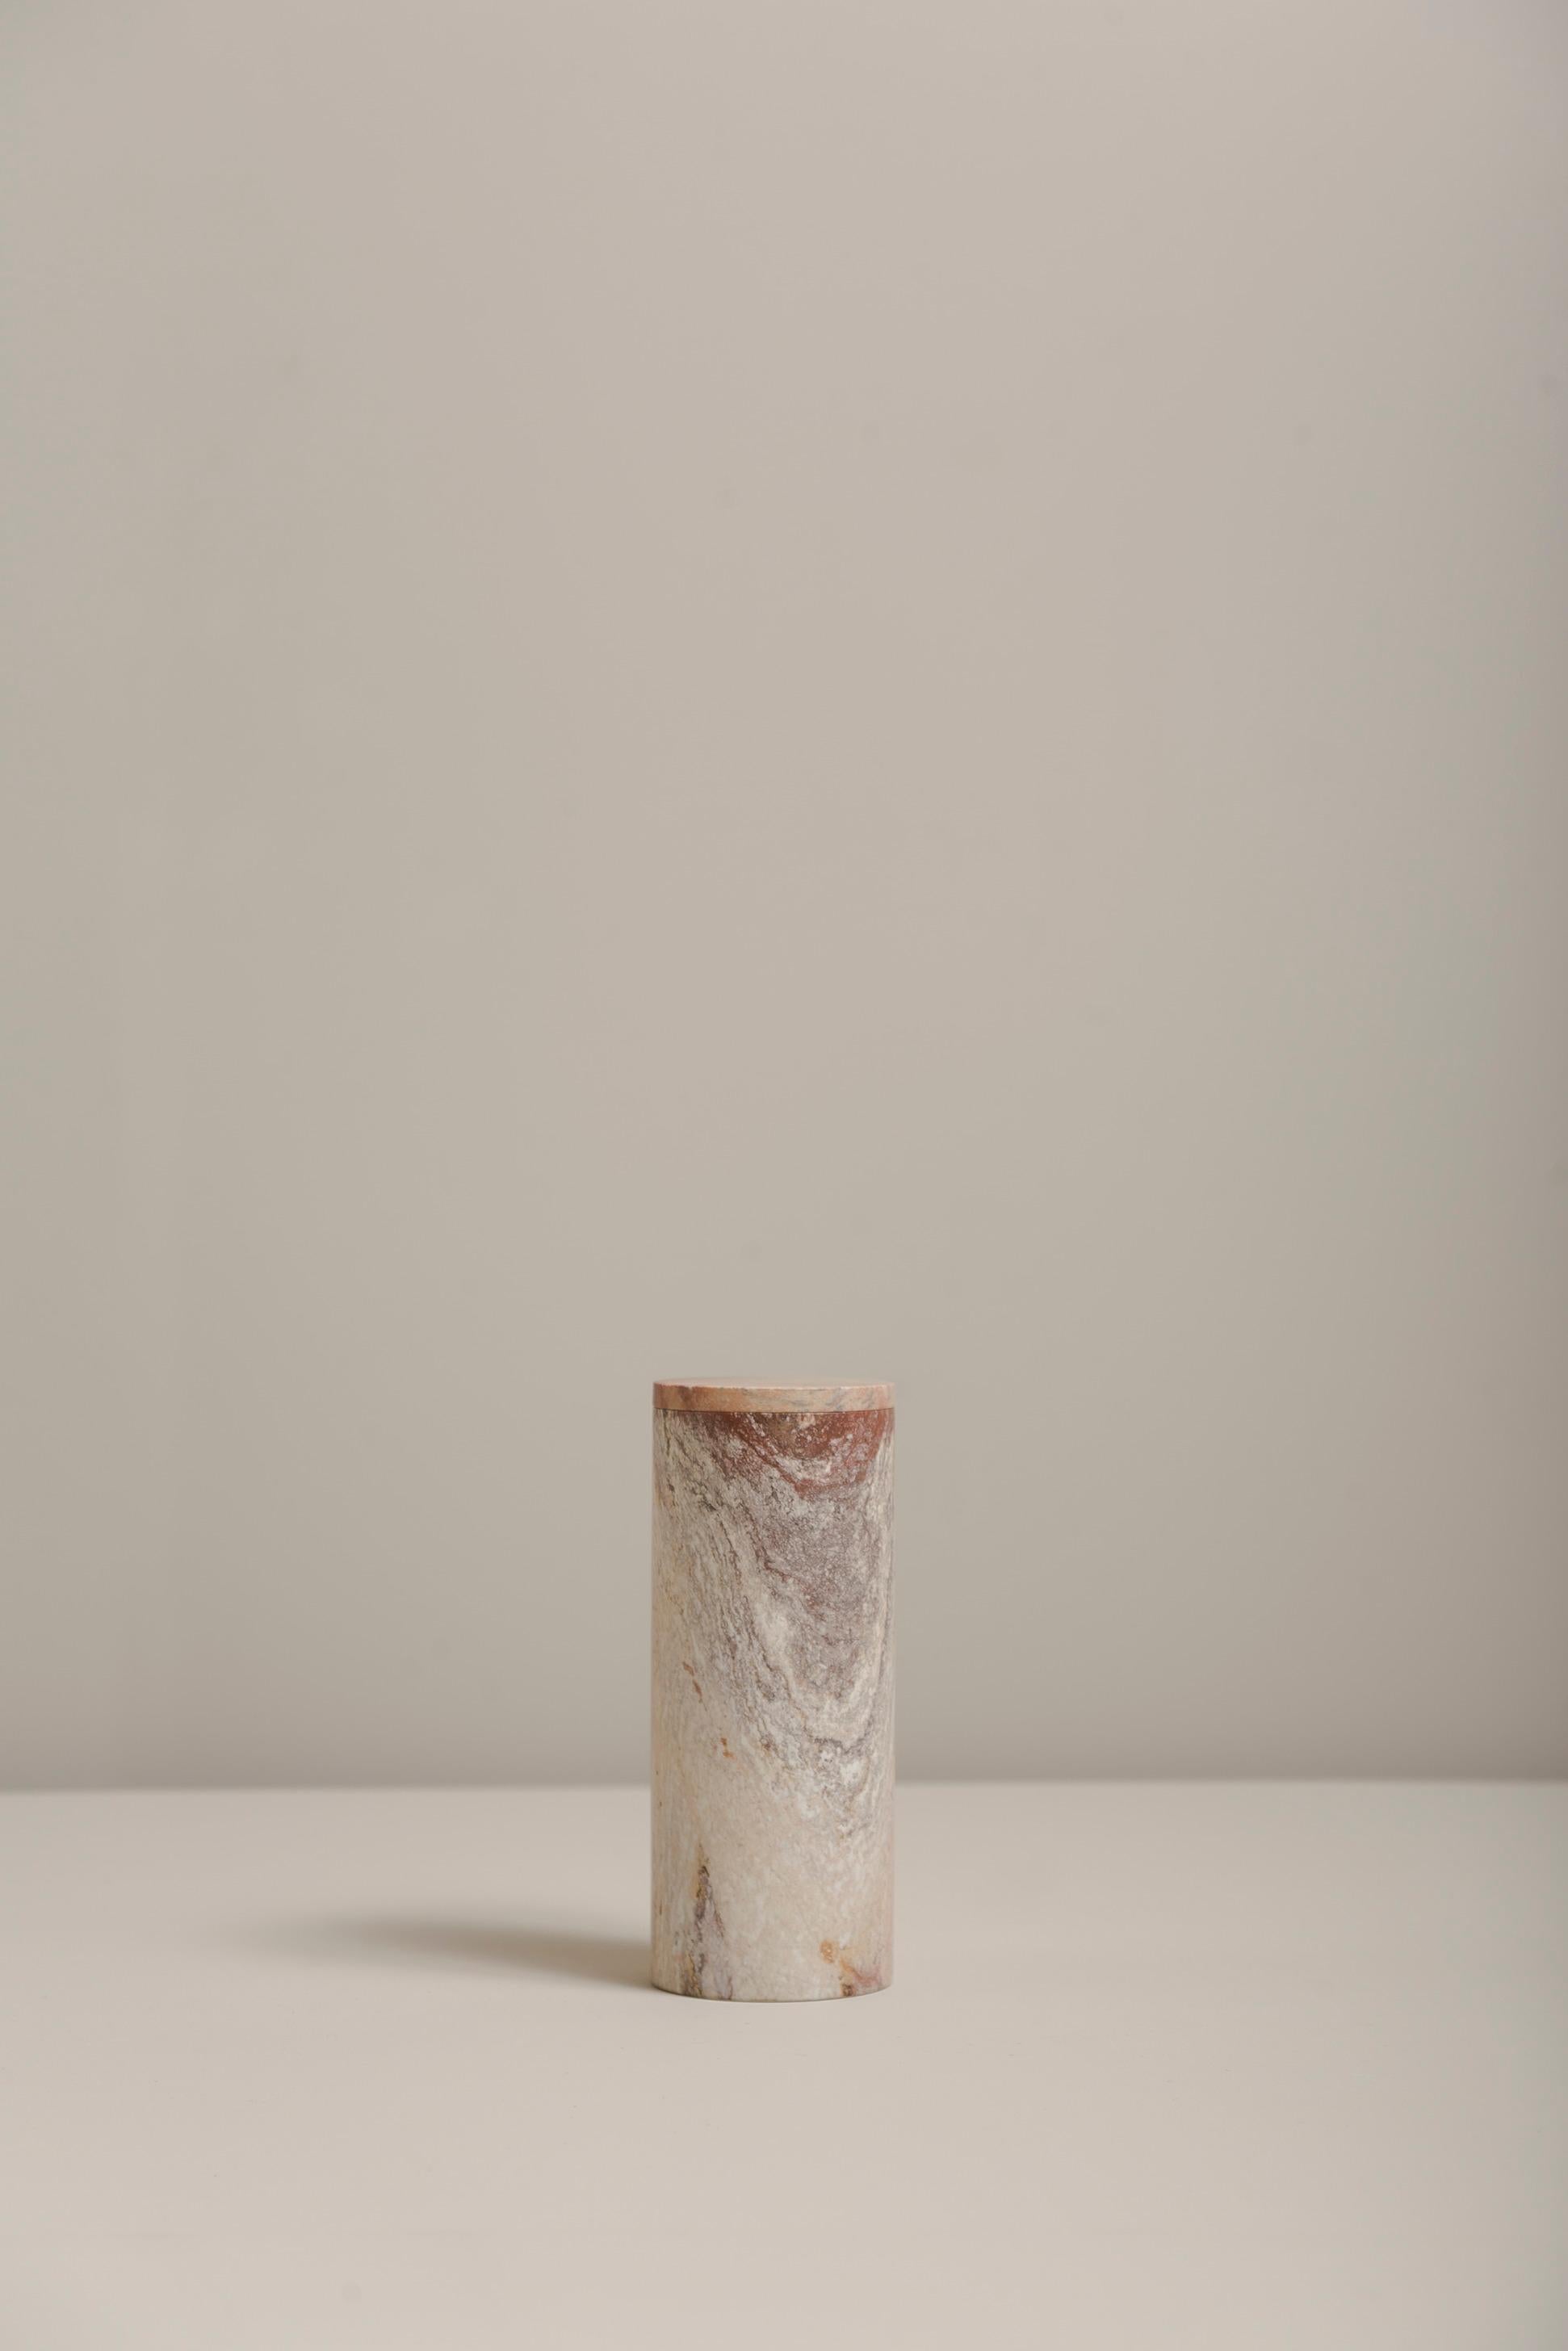 Monolith by Bravo Studio
Monolith FFF1
Materials: Cobarbalita stone
Dimensions: Ø 6 × 15 cm

 
Monolithic objects in Cobarbalita stone
This new series of objects developed by the Chilean design studio bravo! Continues with the logic of